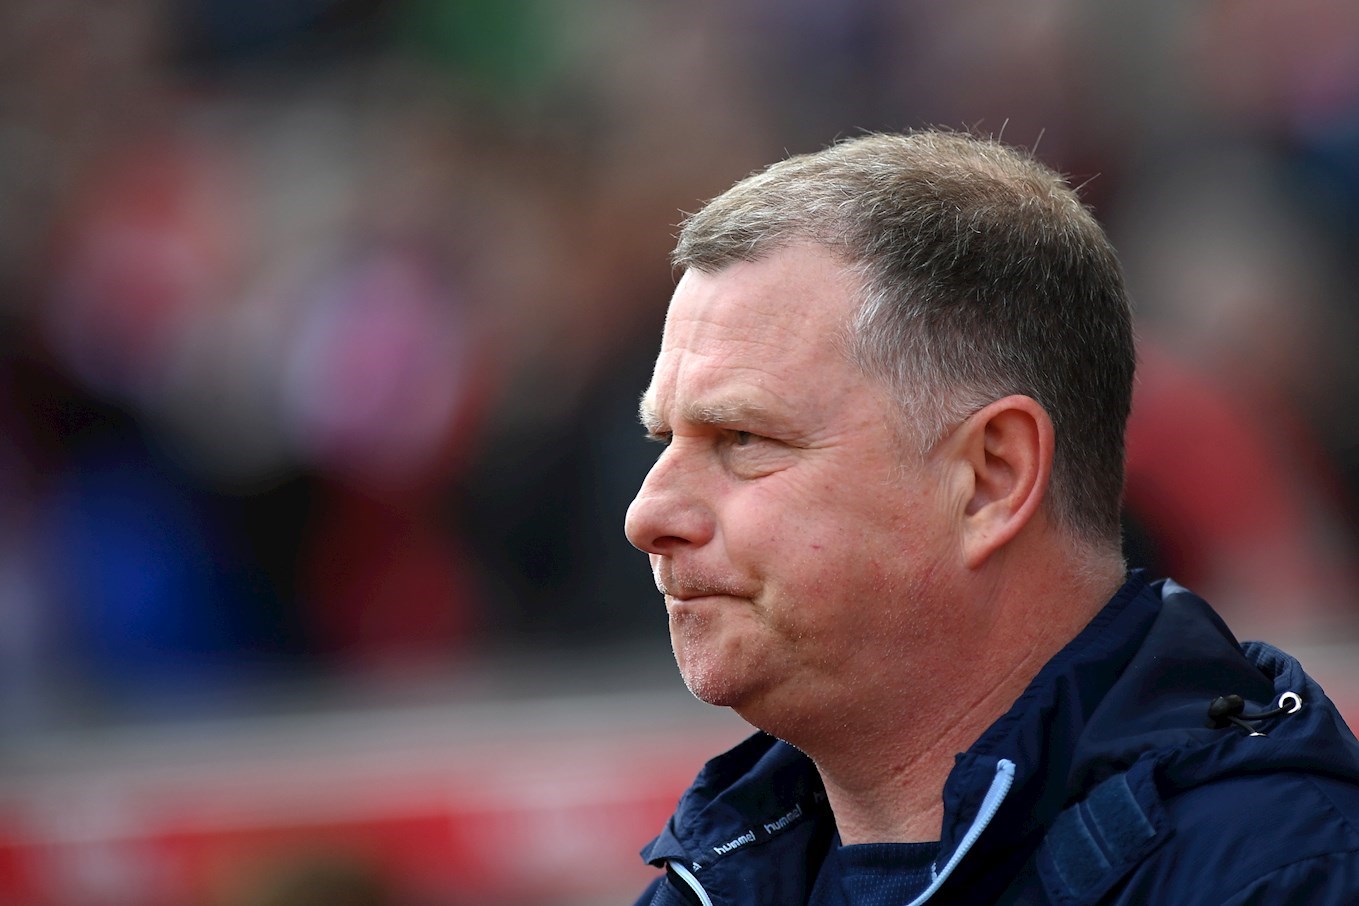 INTERVIEW: Mark Robins Oxford United Reaction - News - Coventry City